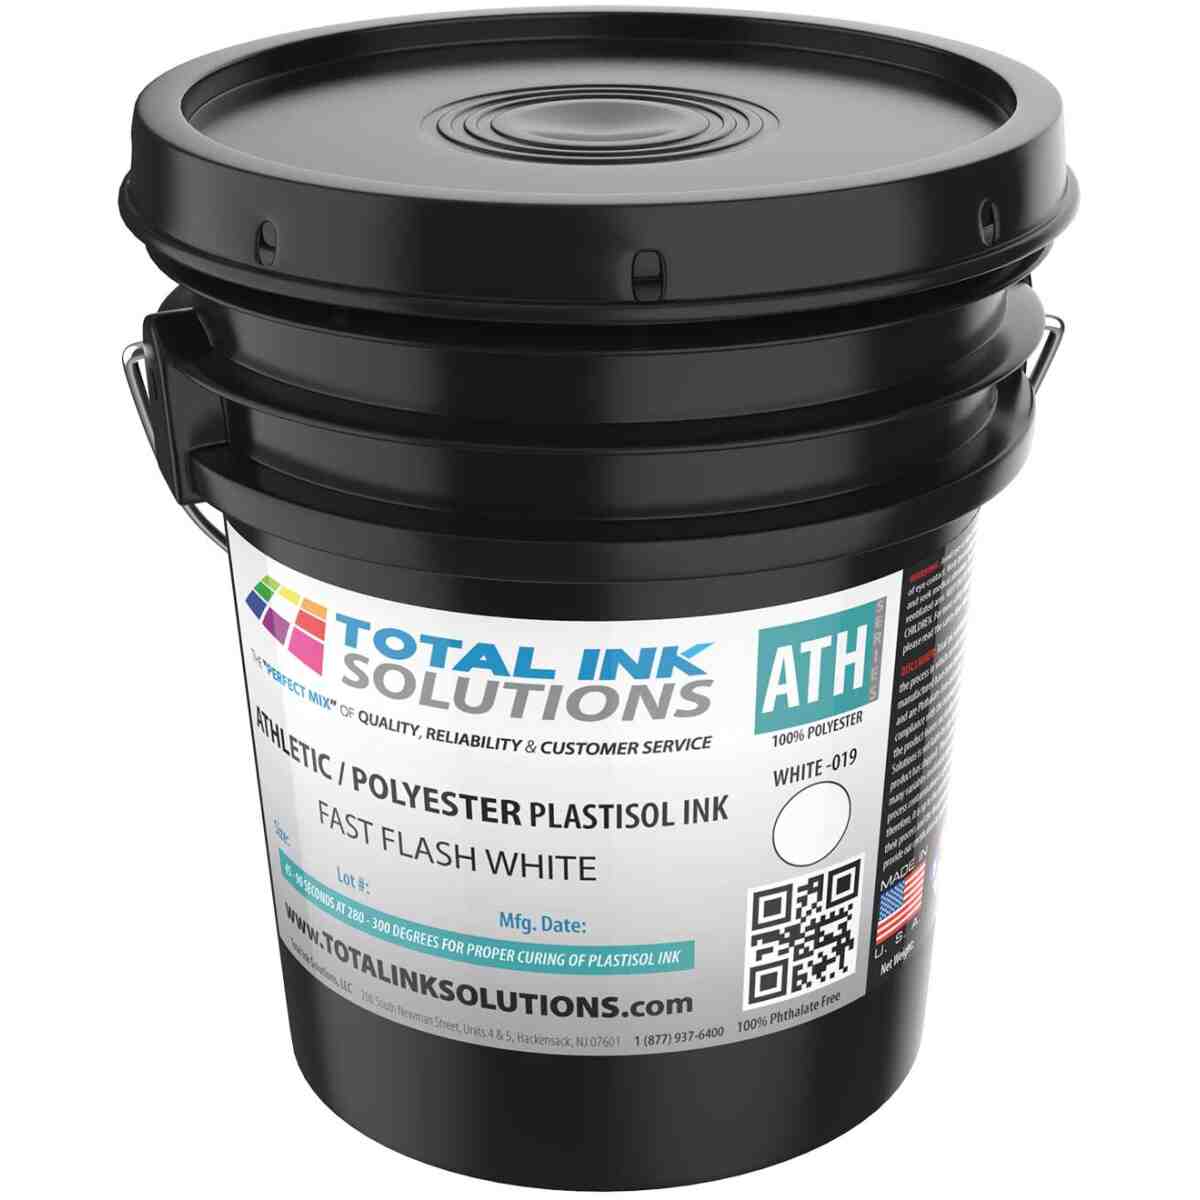 Fast Flash Athletic 100% Polyester Plastisol Ink - White - 5 Gallon TOTAL INK SOLUTIONS®